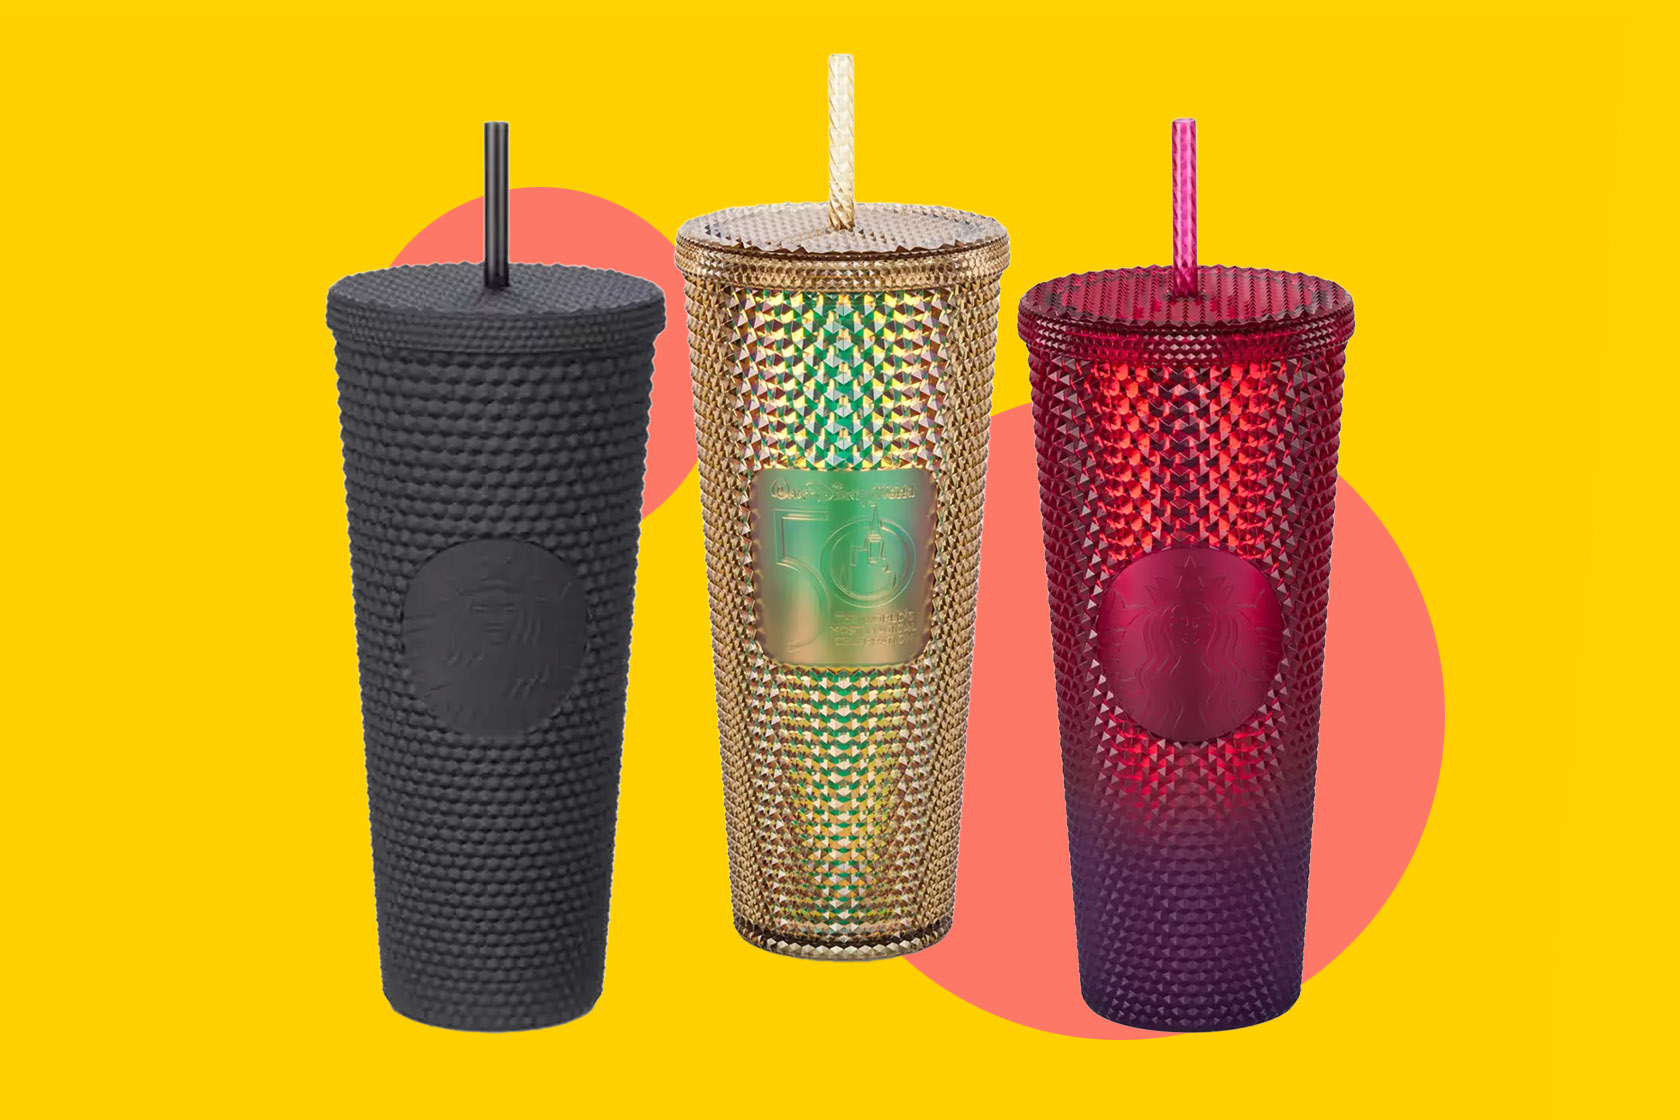 Starbucks Just Brought Back Its Rare Stanley Tumbler Cup for Christmas